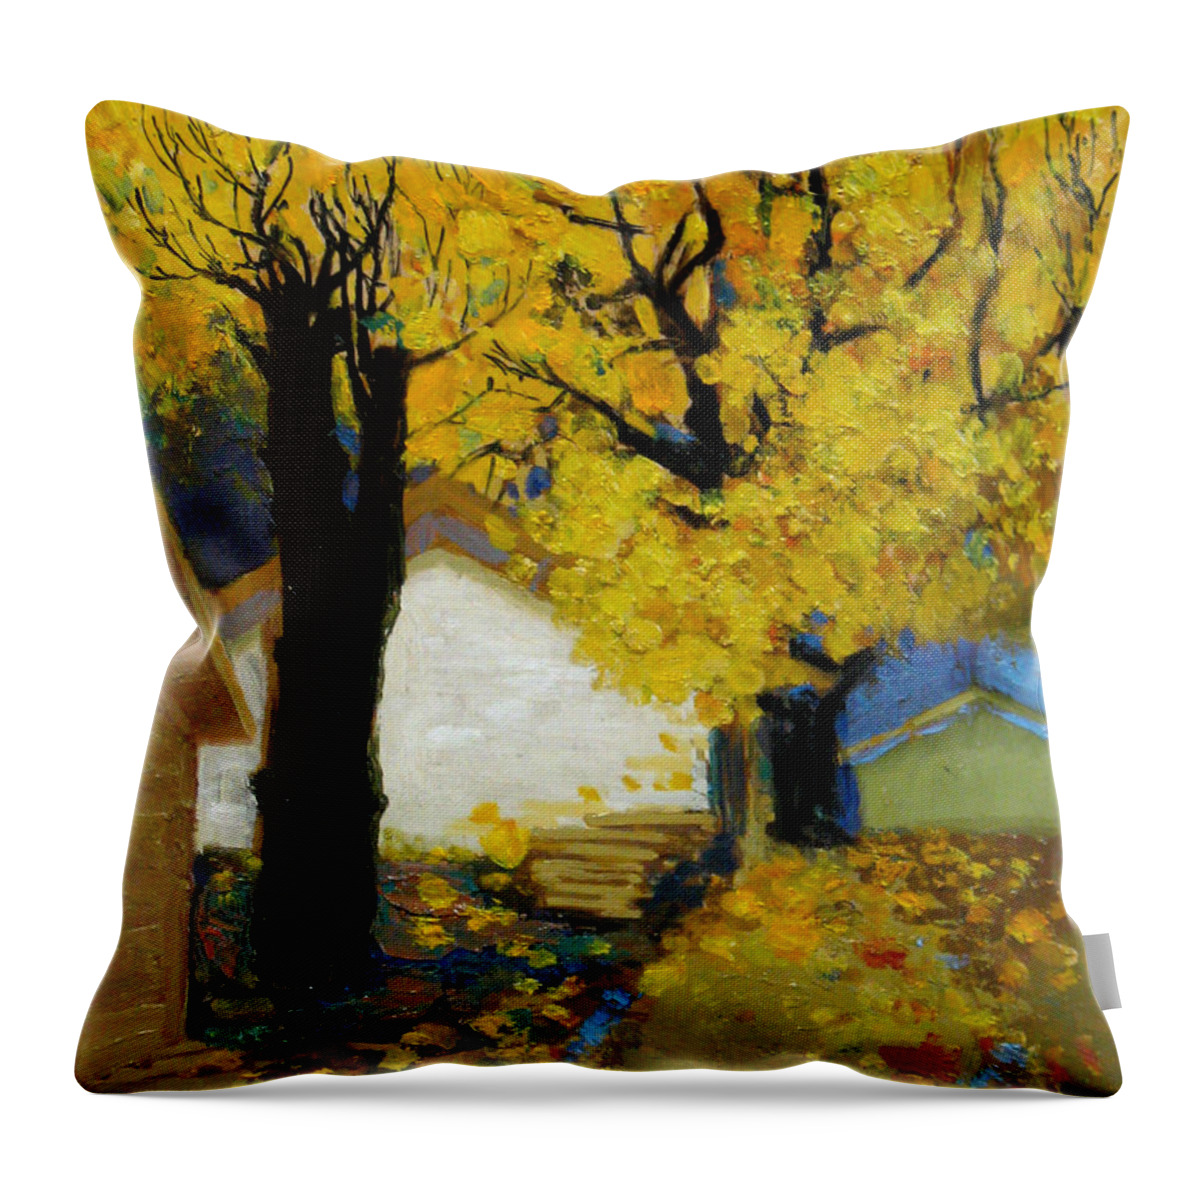 Yellow Throw Pillow featuring the painting Yellow by Meihua Lu